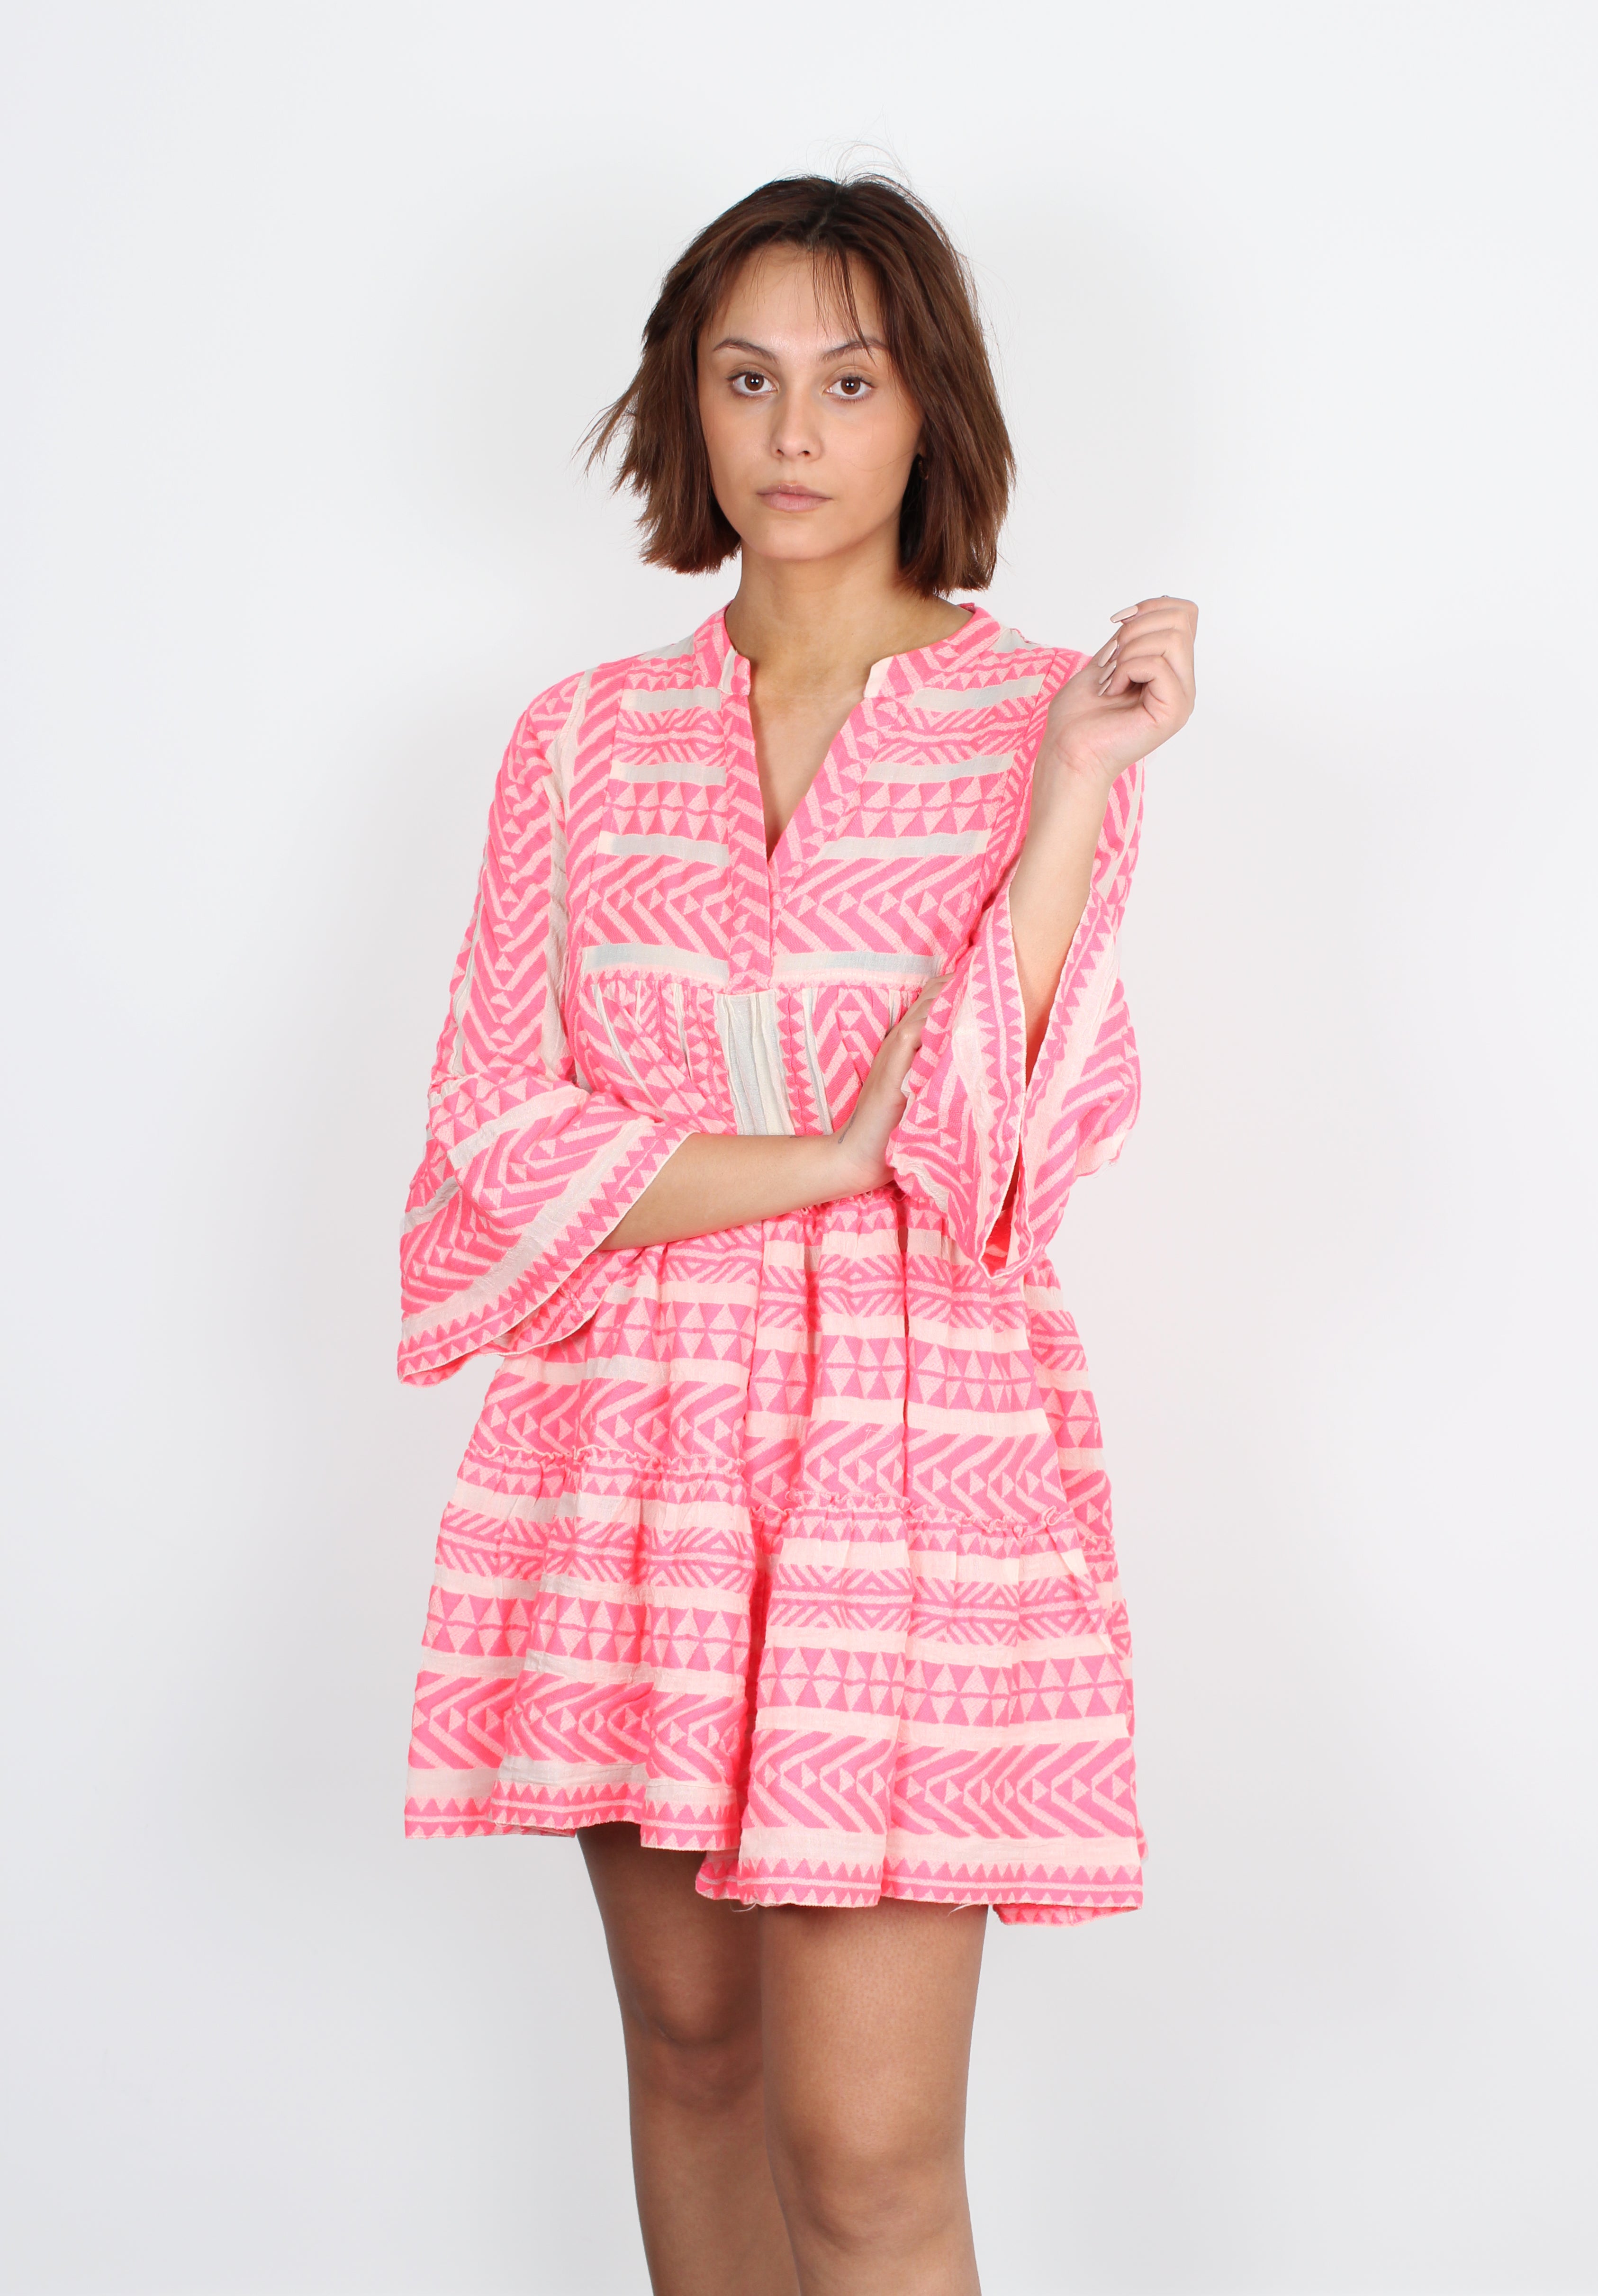 Ella Dress 193 in Neon Pink and Off White